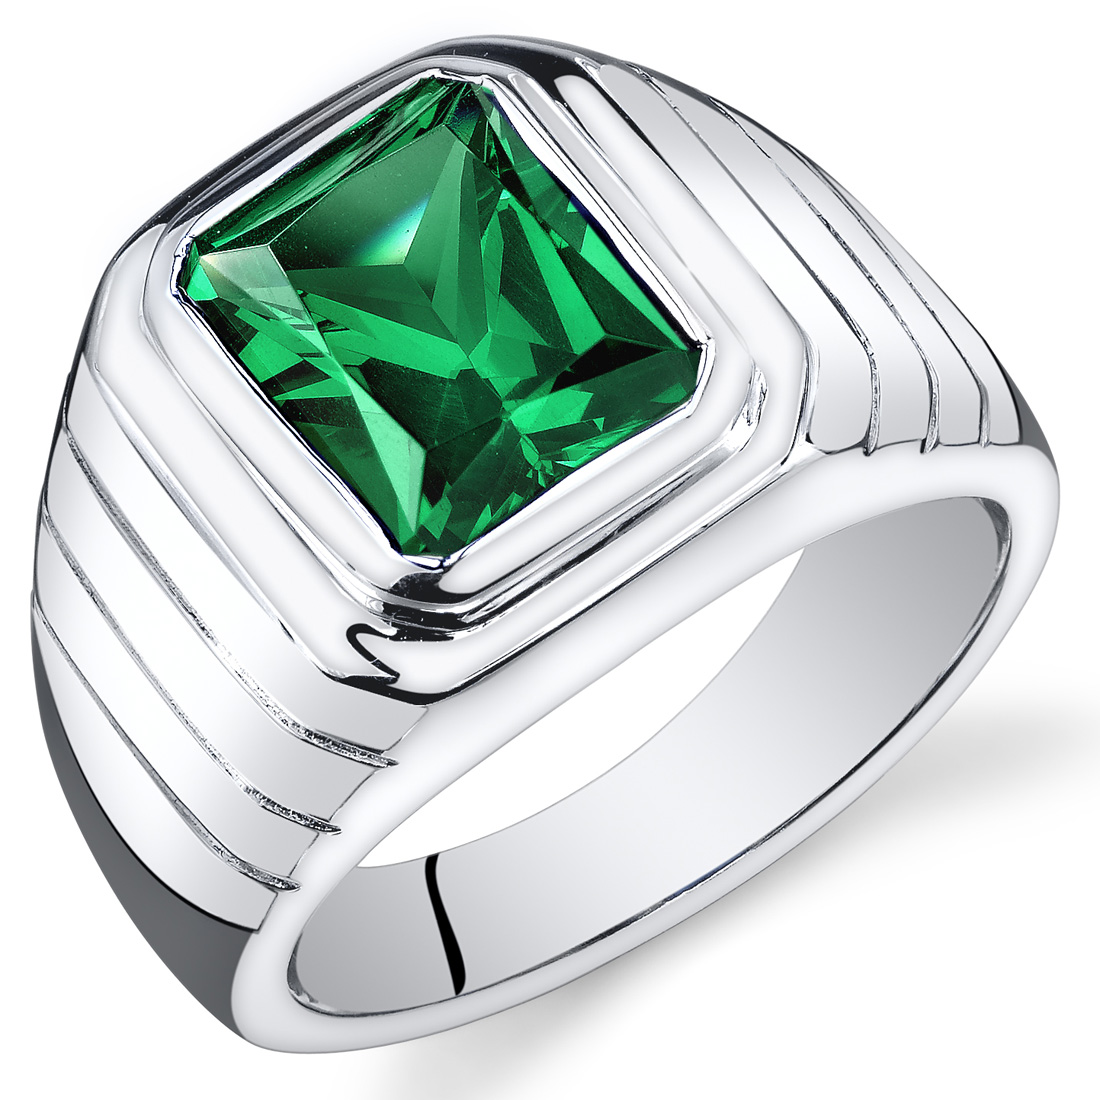 Mens 5.5 cts Octagon Cut Emerald Sterling Silver Ring Sizes 8 To 13